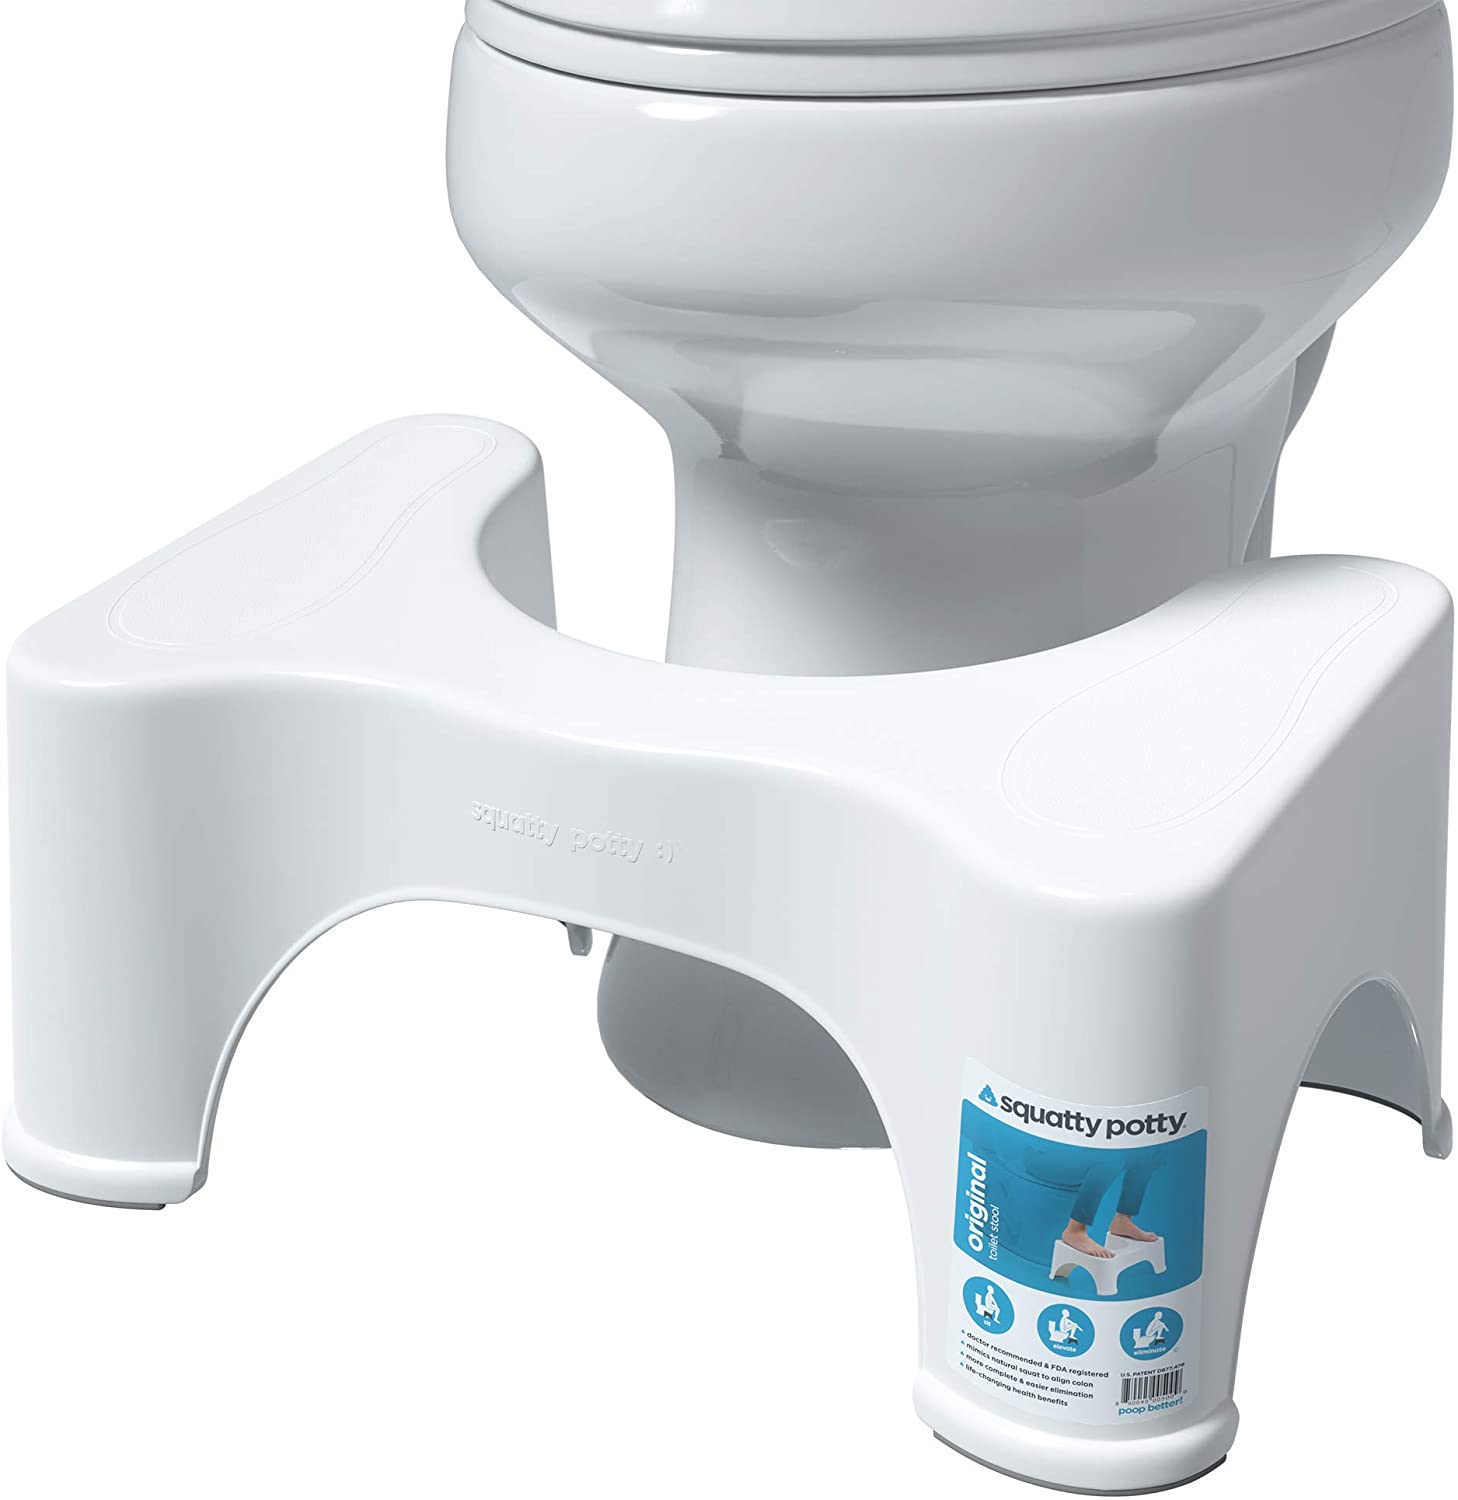 What Size Squatty Potty Should I Get